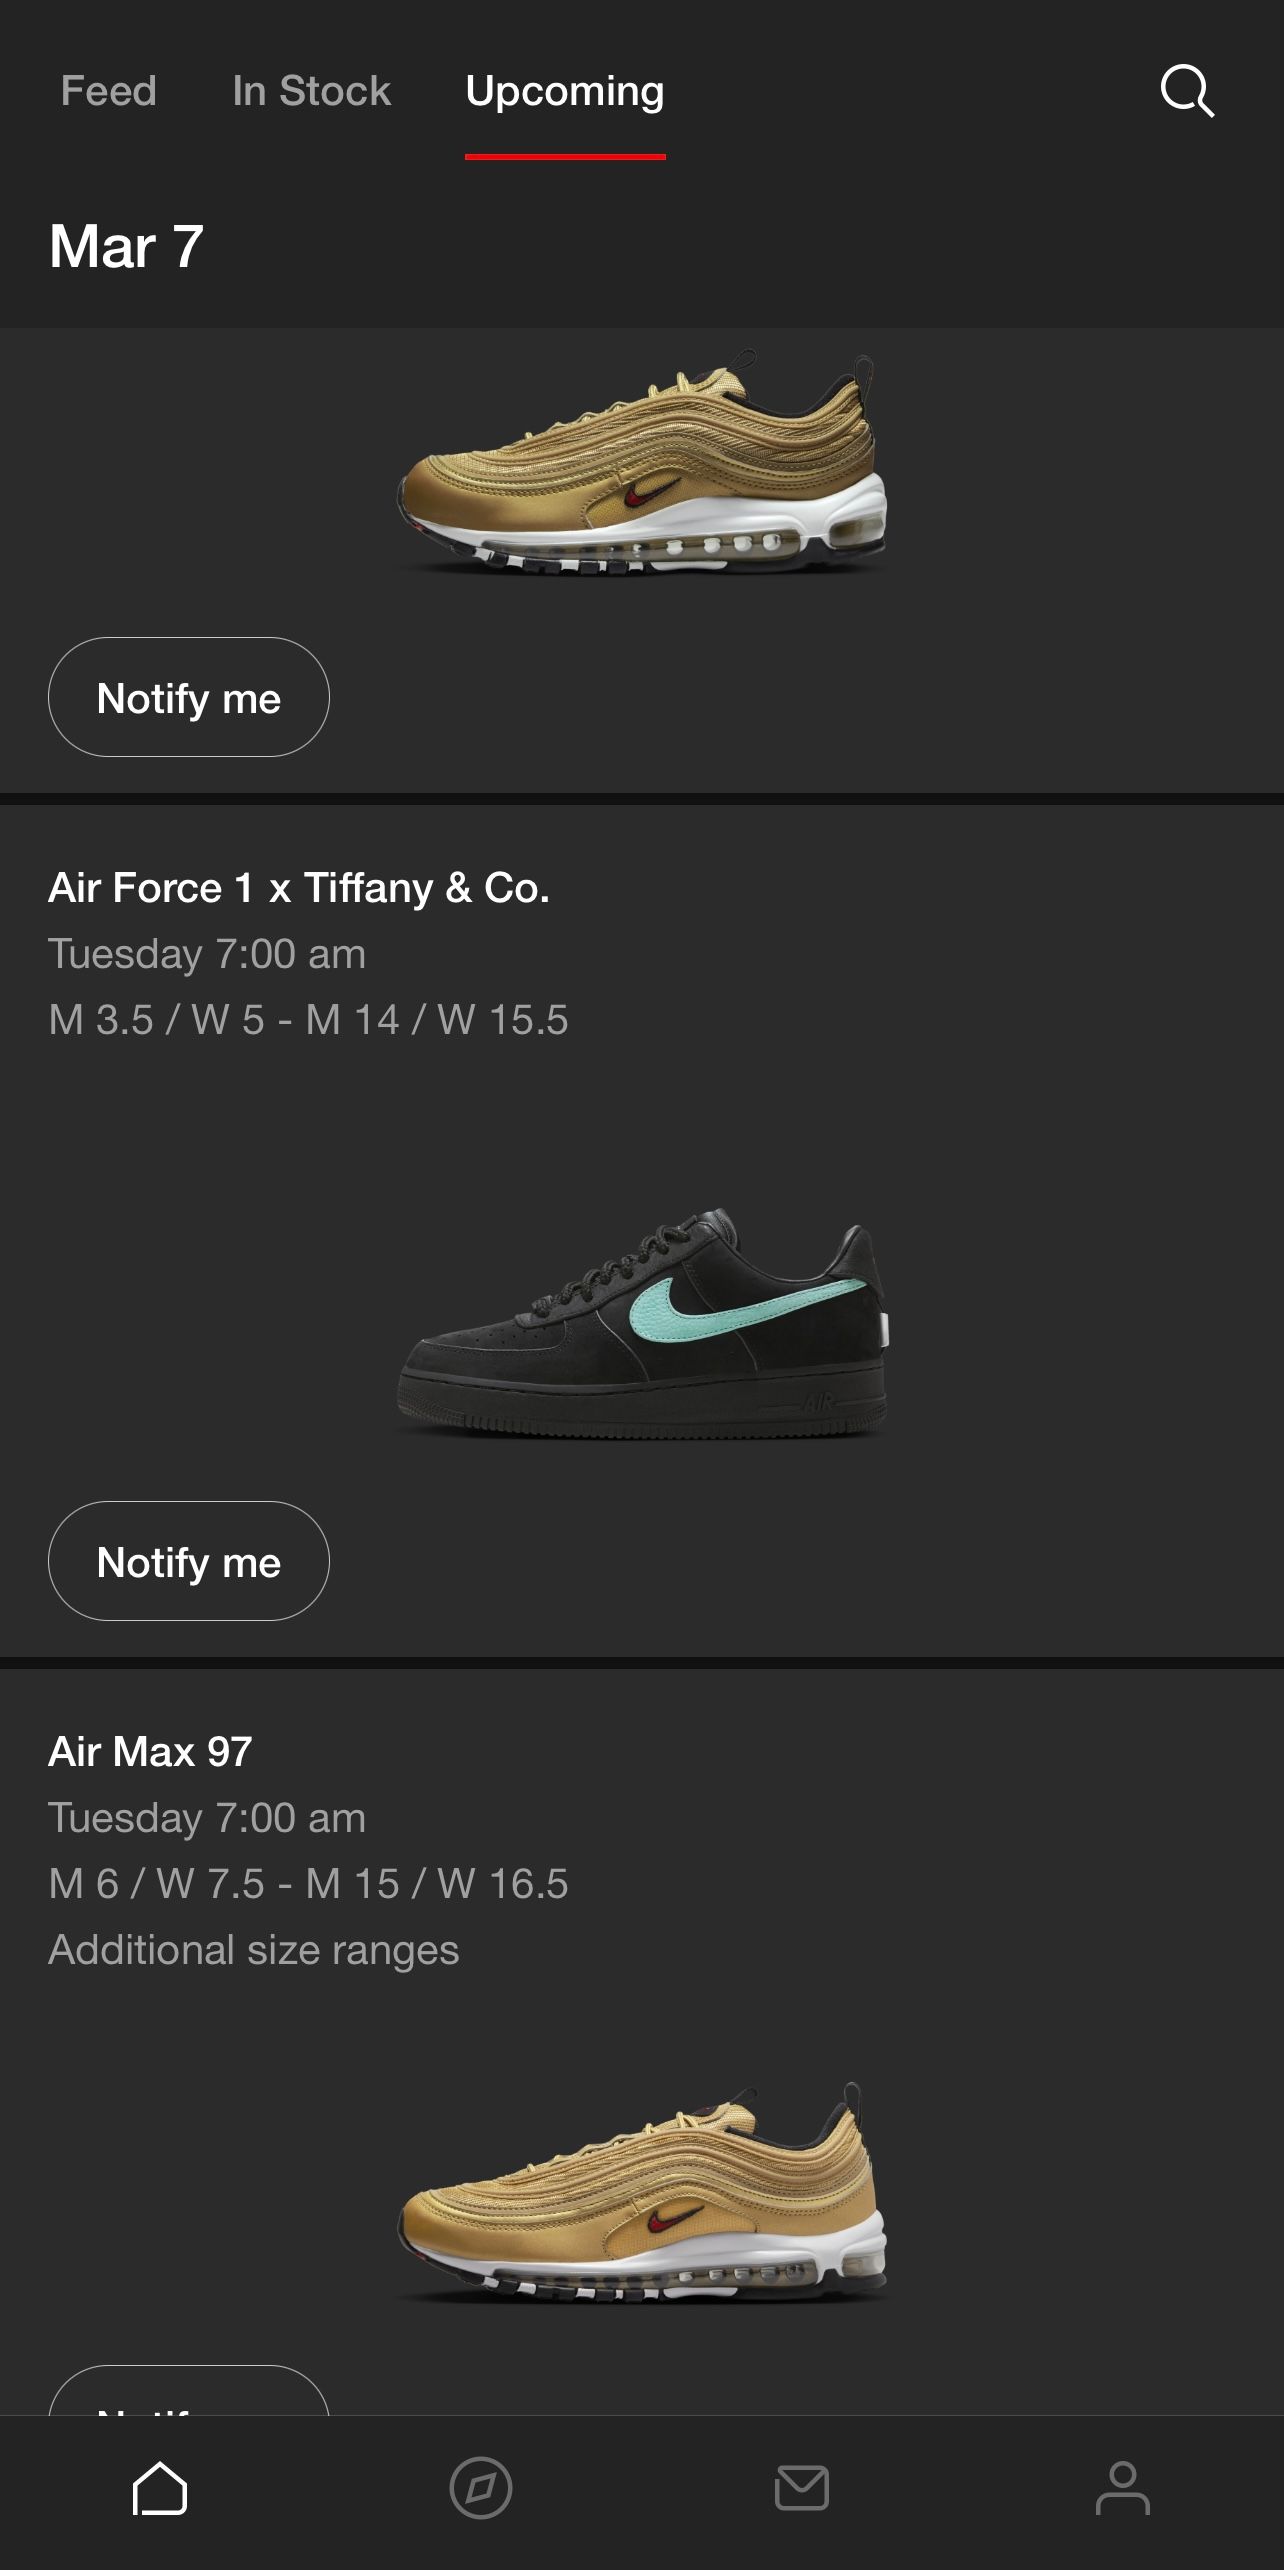 US' Nike & Tiffany set to drop limited edition sneakers in Mar 2023